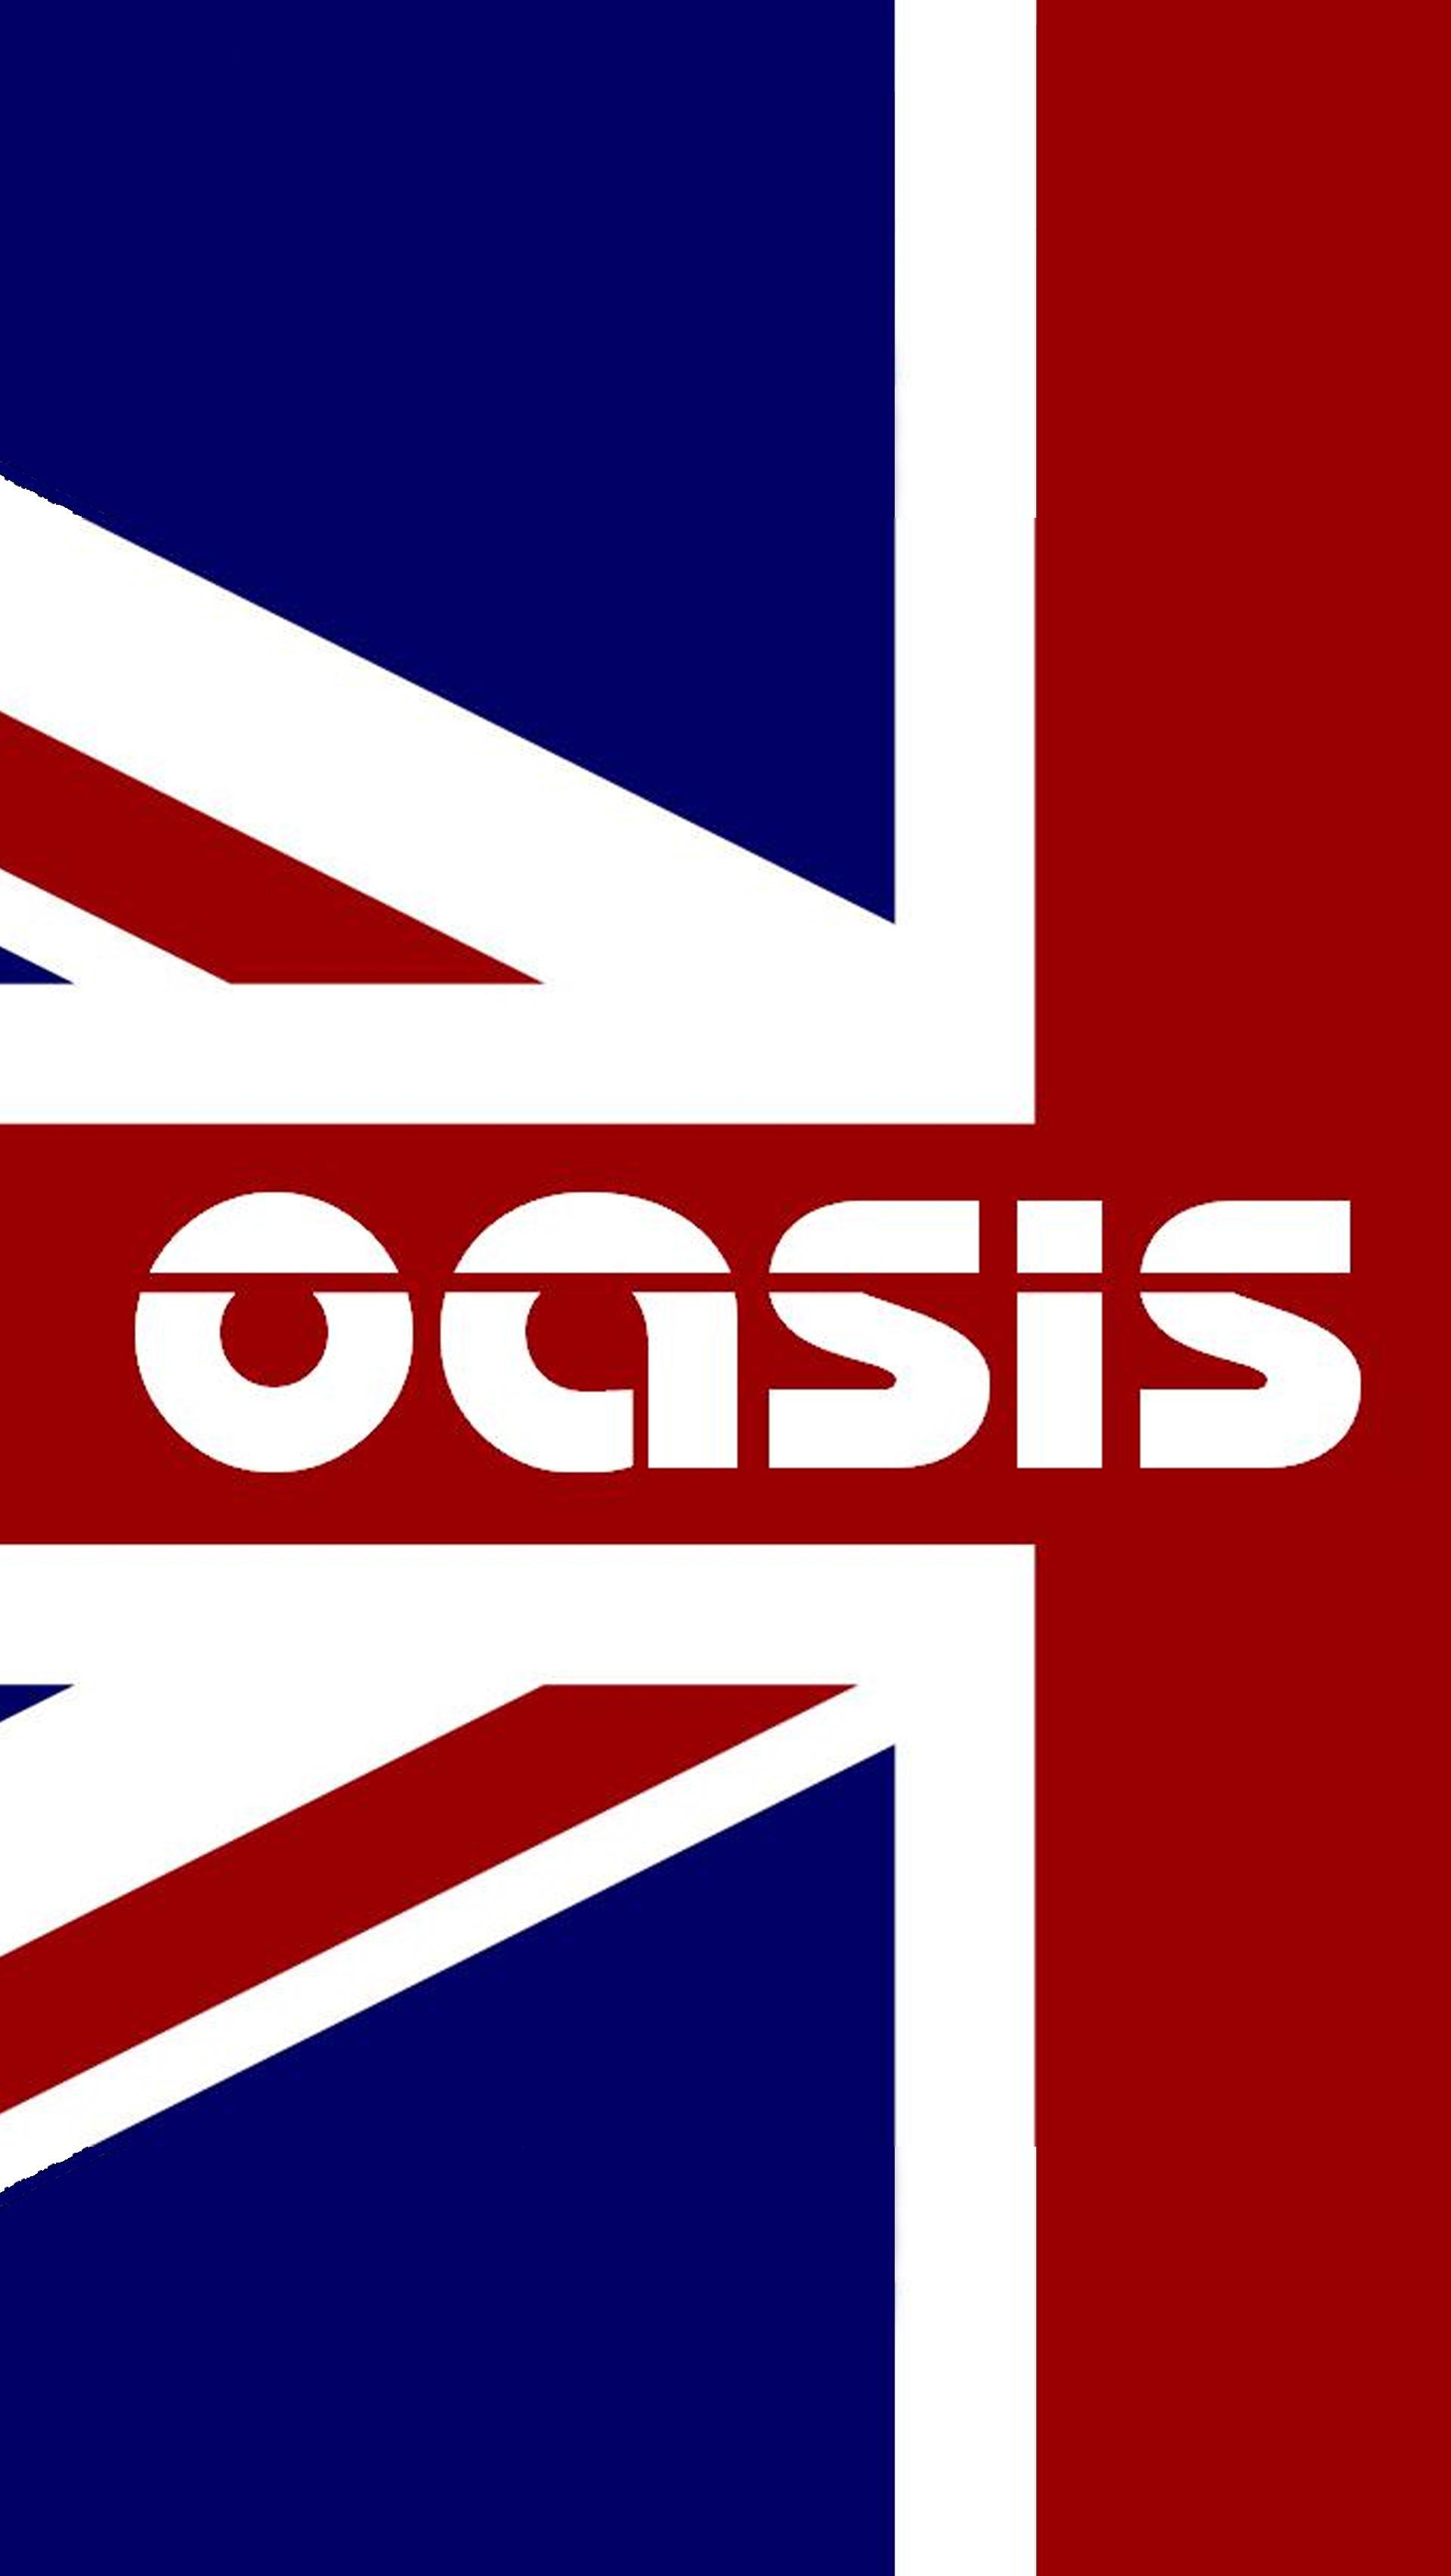 Oasis Android Wallpapers Wallpaper Cave